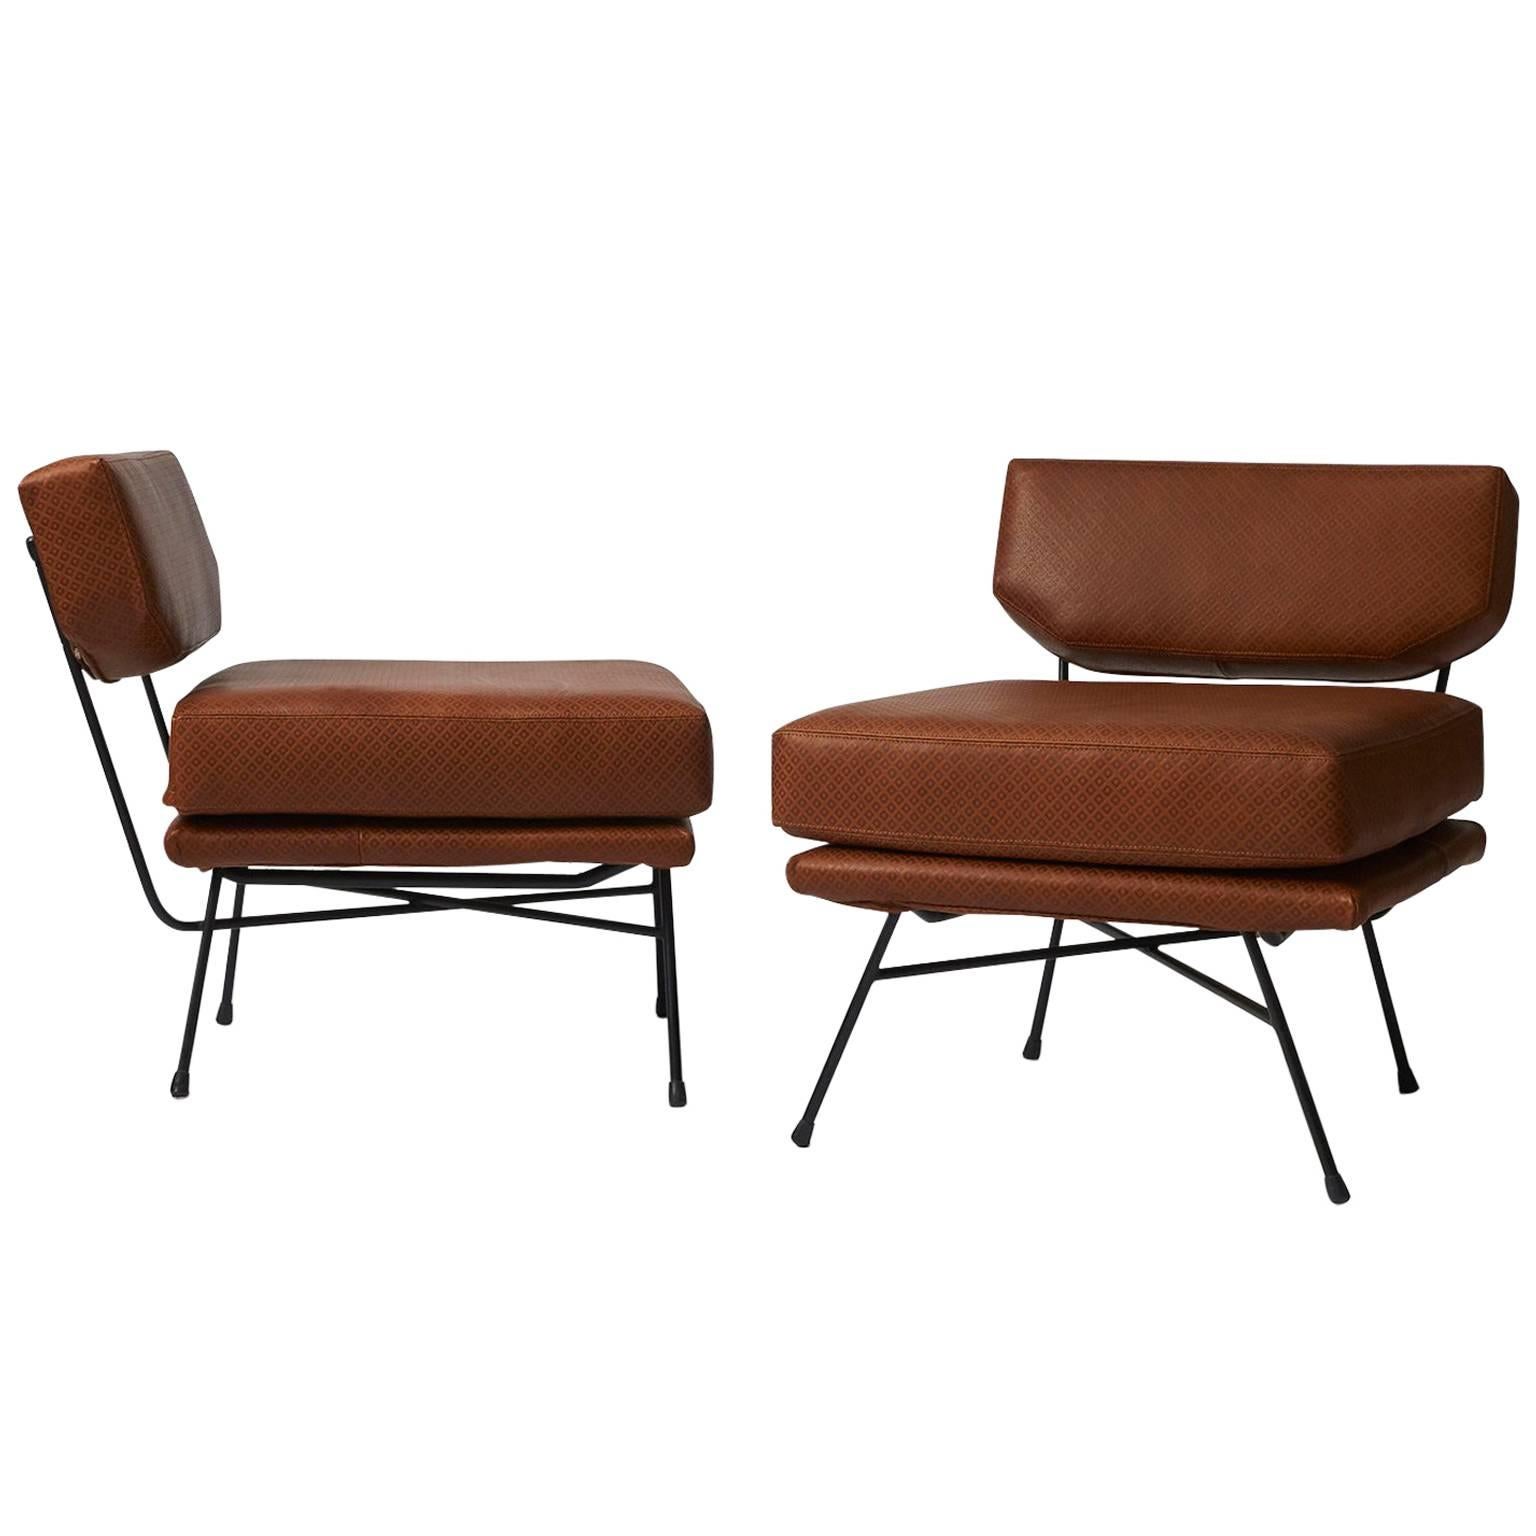 Pair of "Elettra" Chairs by BBPR